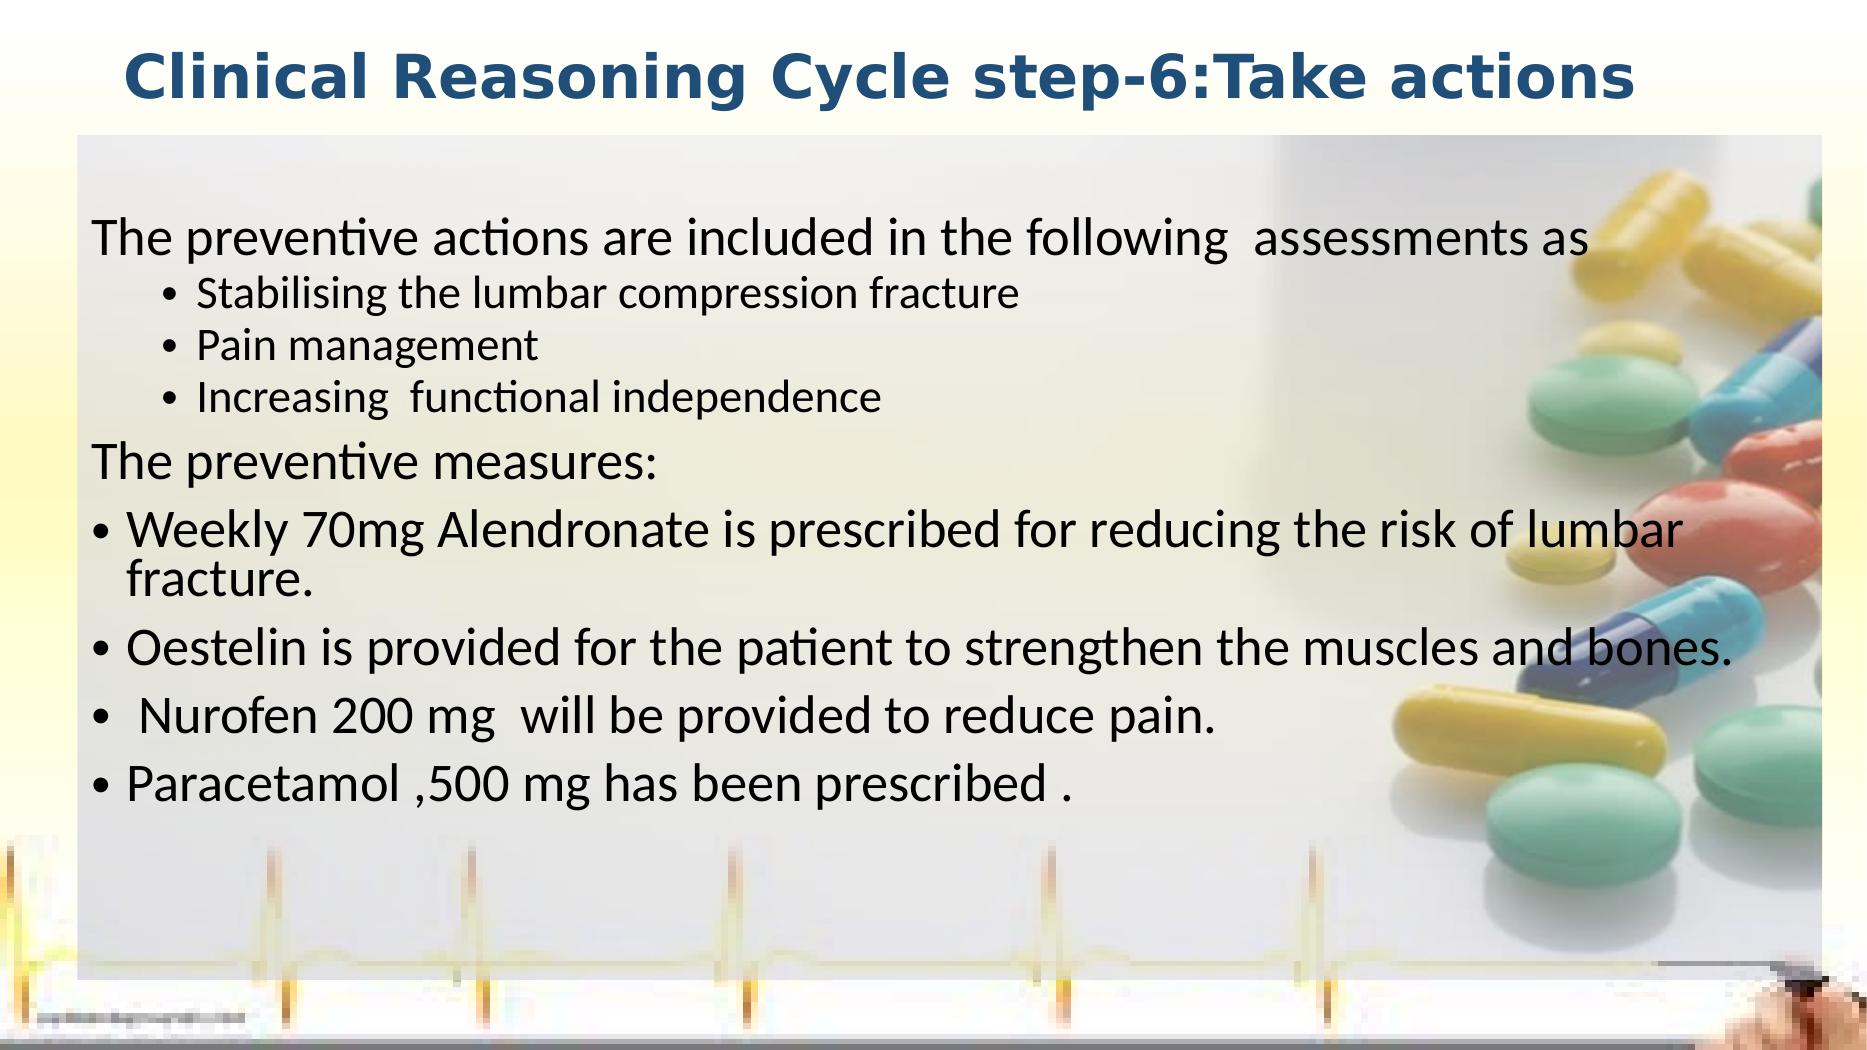 Controlling Osteoporosis: Clinical Reasoning Cycle Steps and Preventive Measures_3